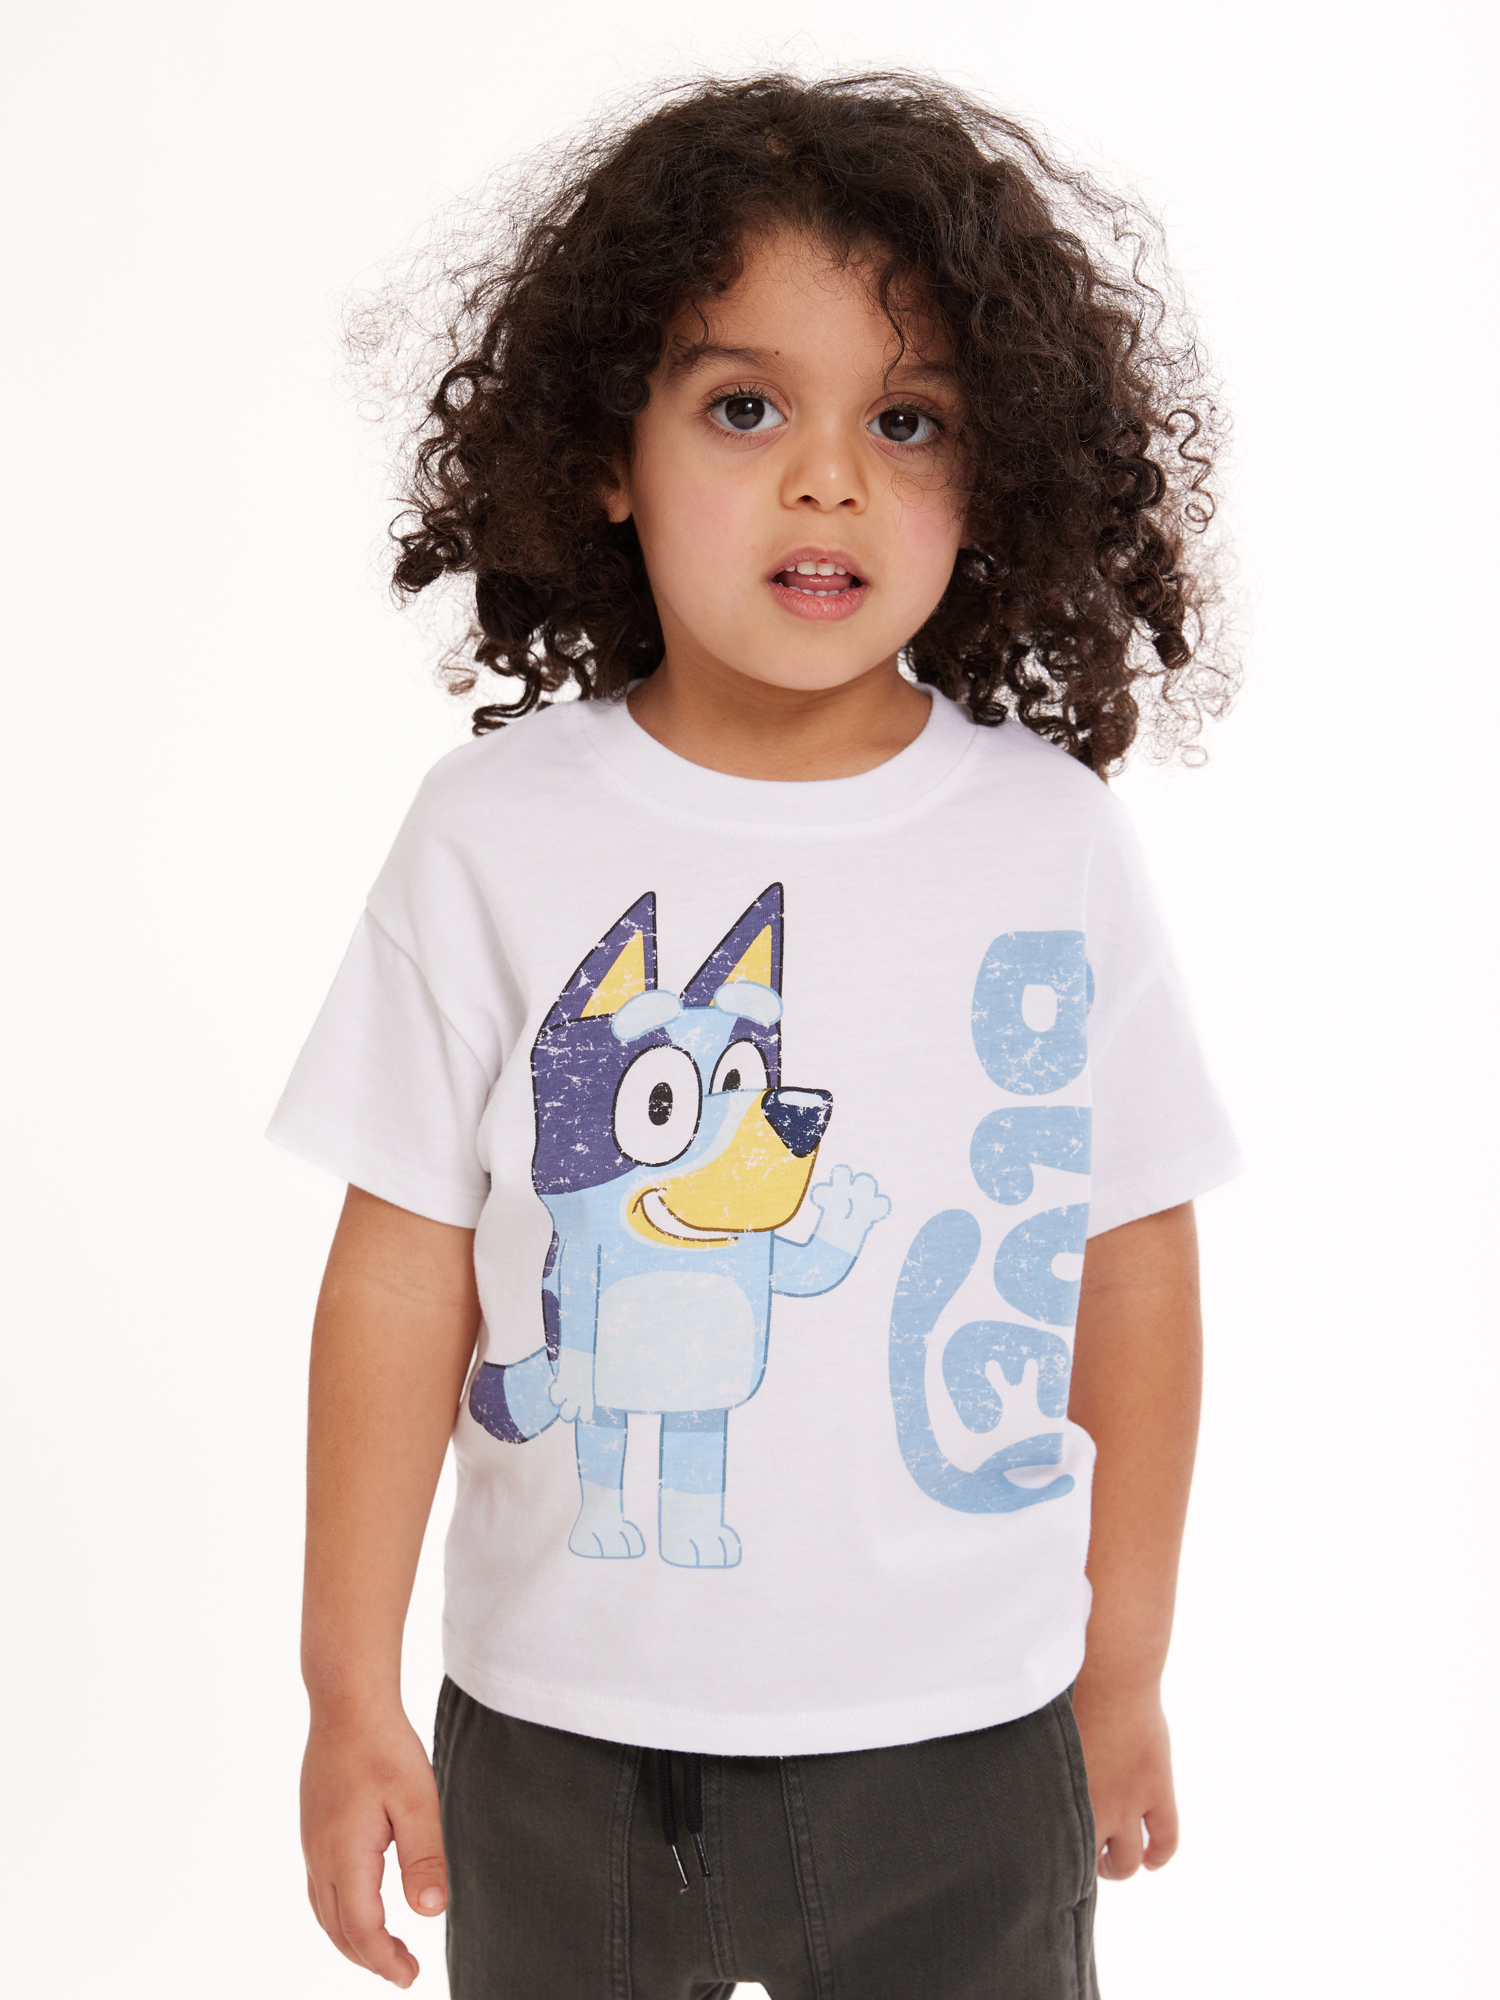 Bluey Toddler Boy Graphic Tees, 2-Pack, Sizes 2T-5T - image 4 of 7